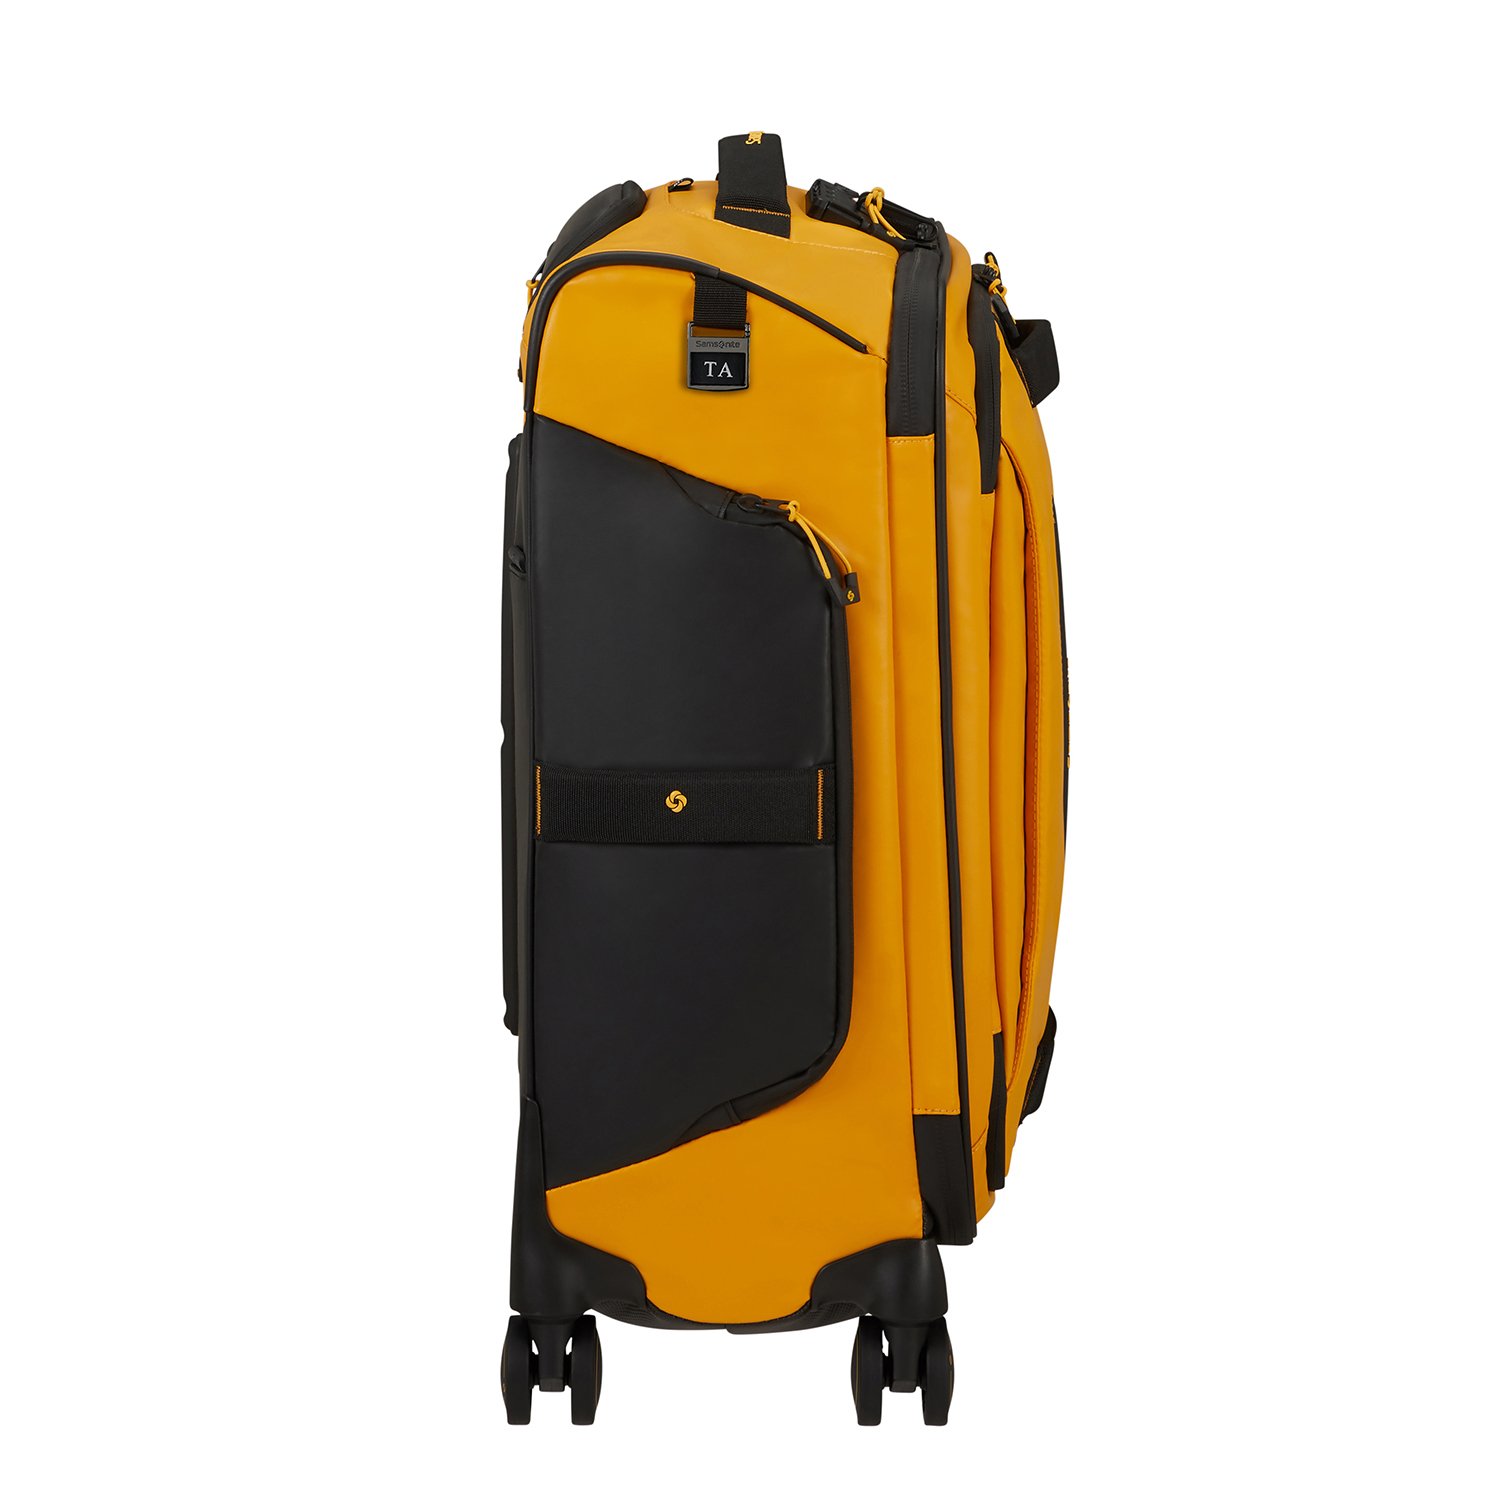 ECODIVER-SPINNER DUFFLE 55/20 SKH7-015-SF000*06